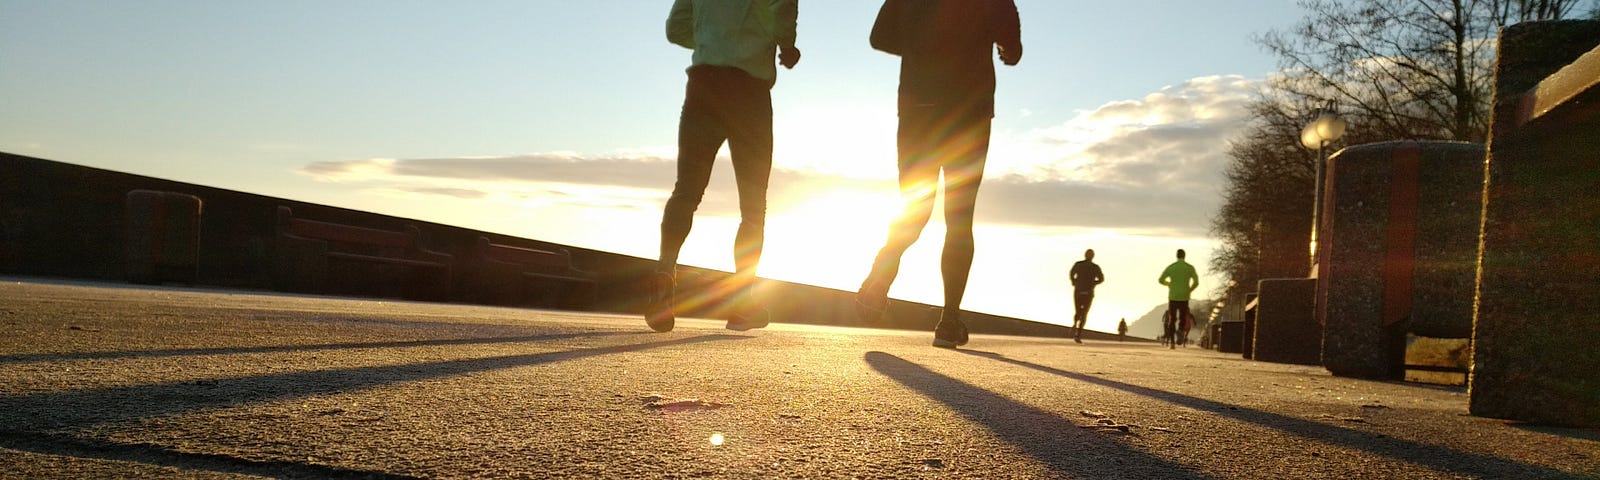 Silhouette of two runners wearing hats and gloves run away from the camera down a sidewalk at sunrise.